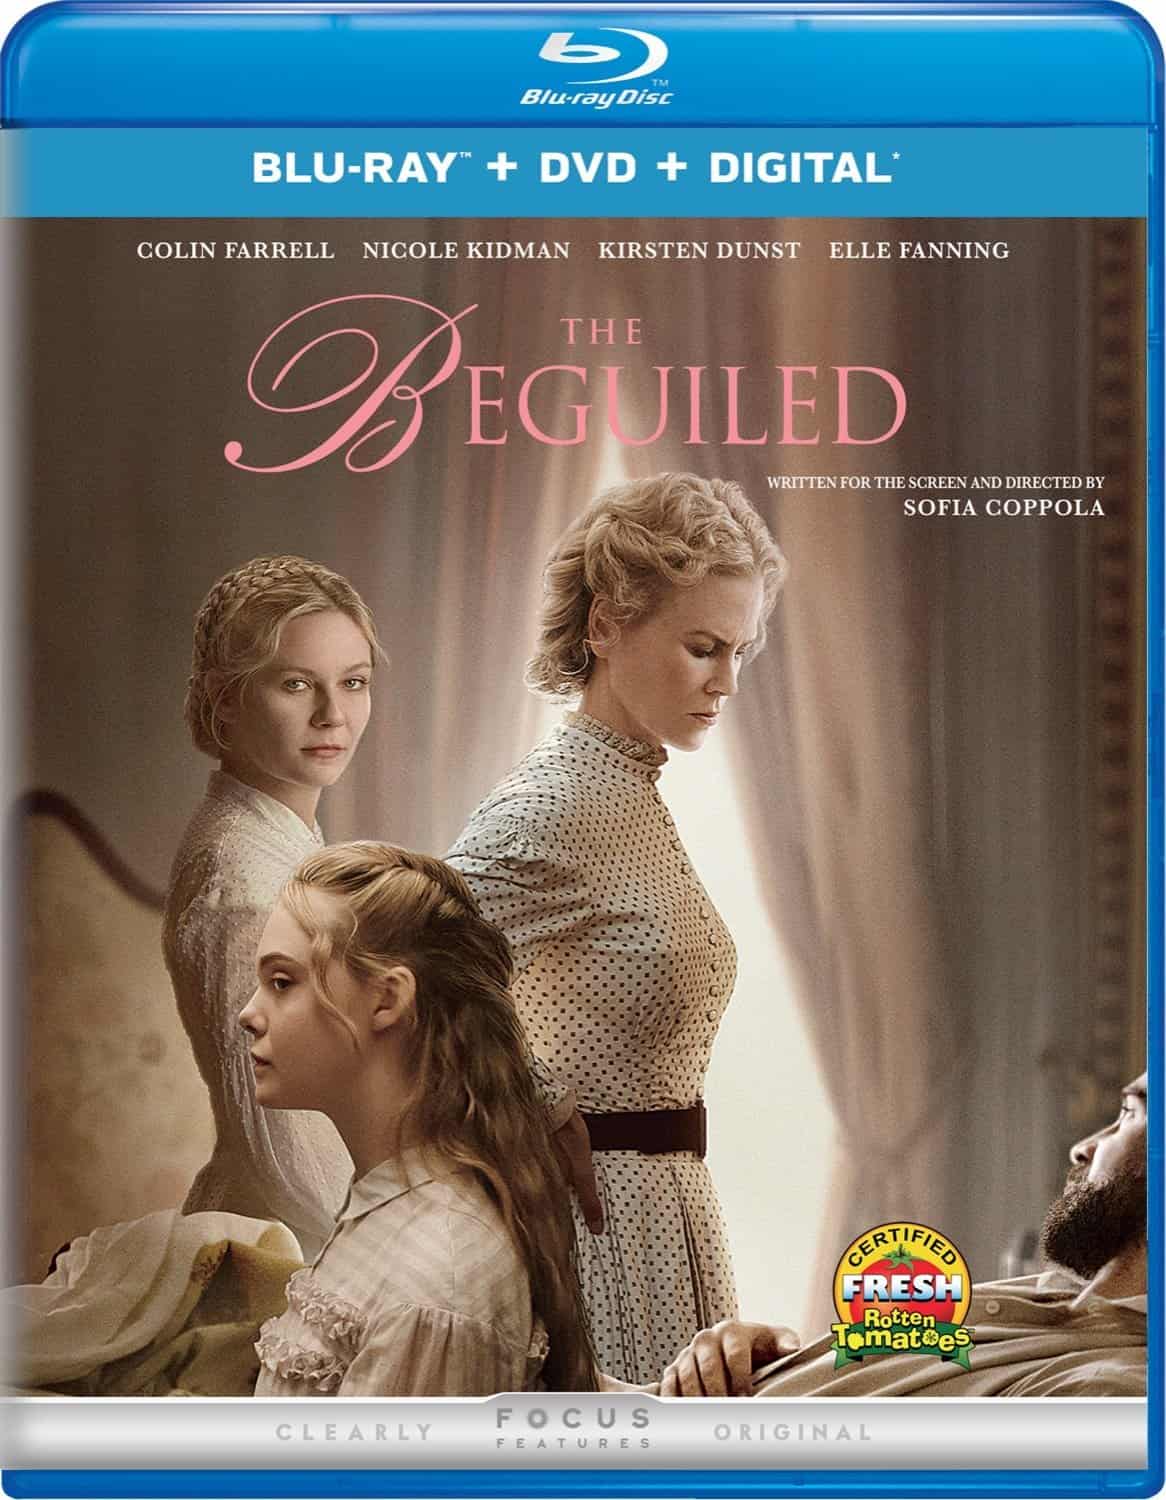 The Beguiled Starring Colin Farrell and Nicole Kidman